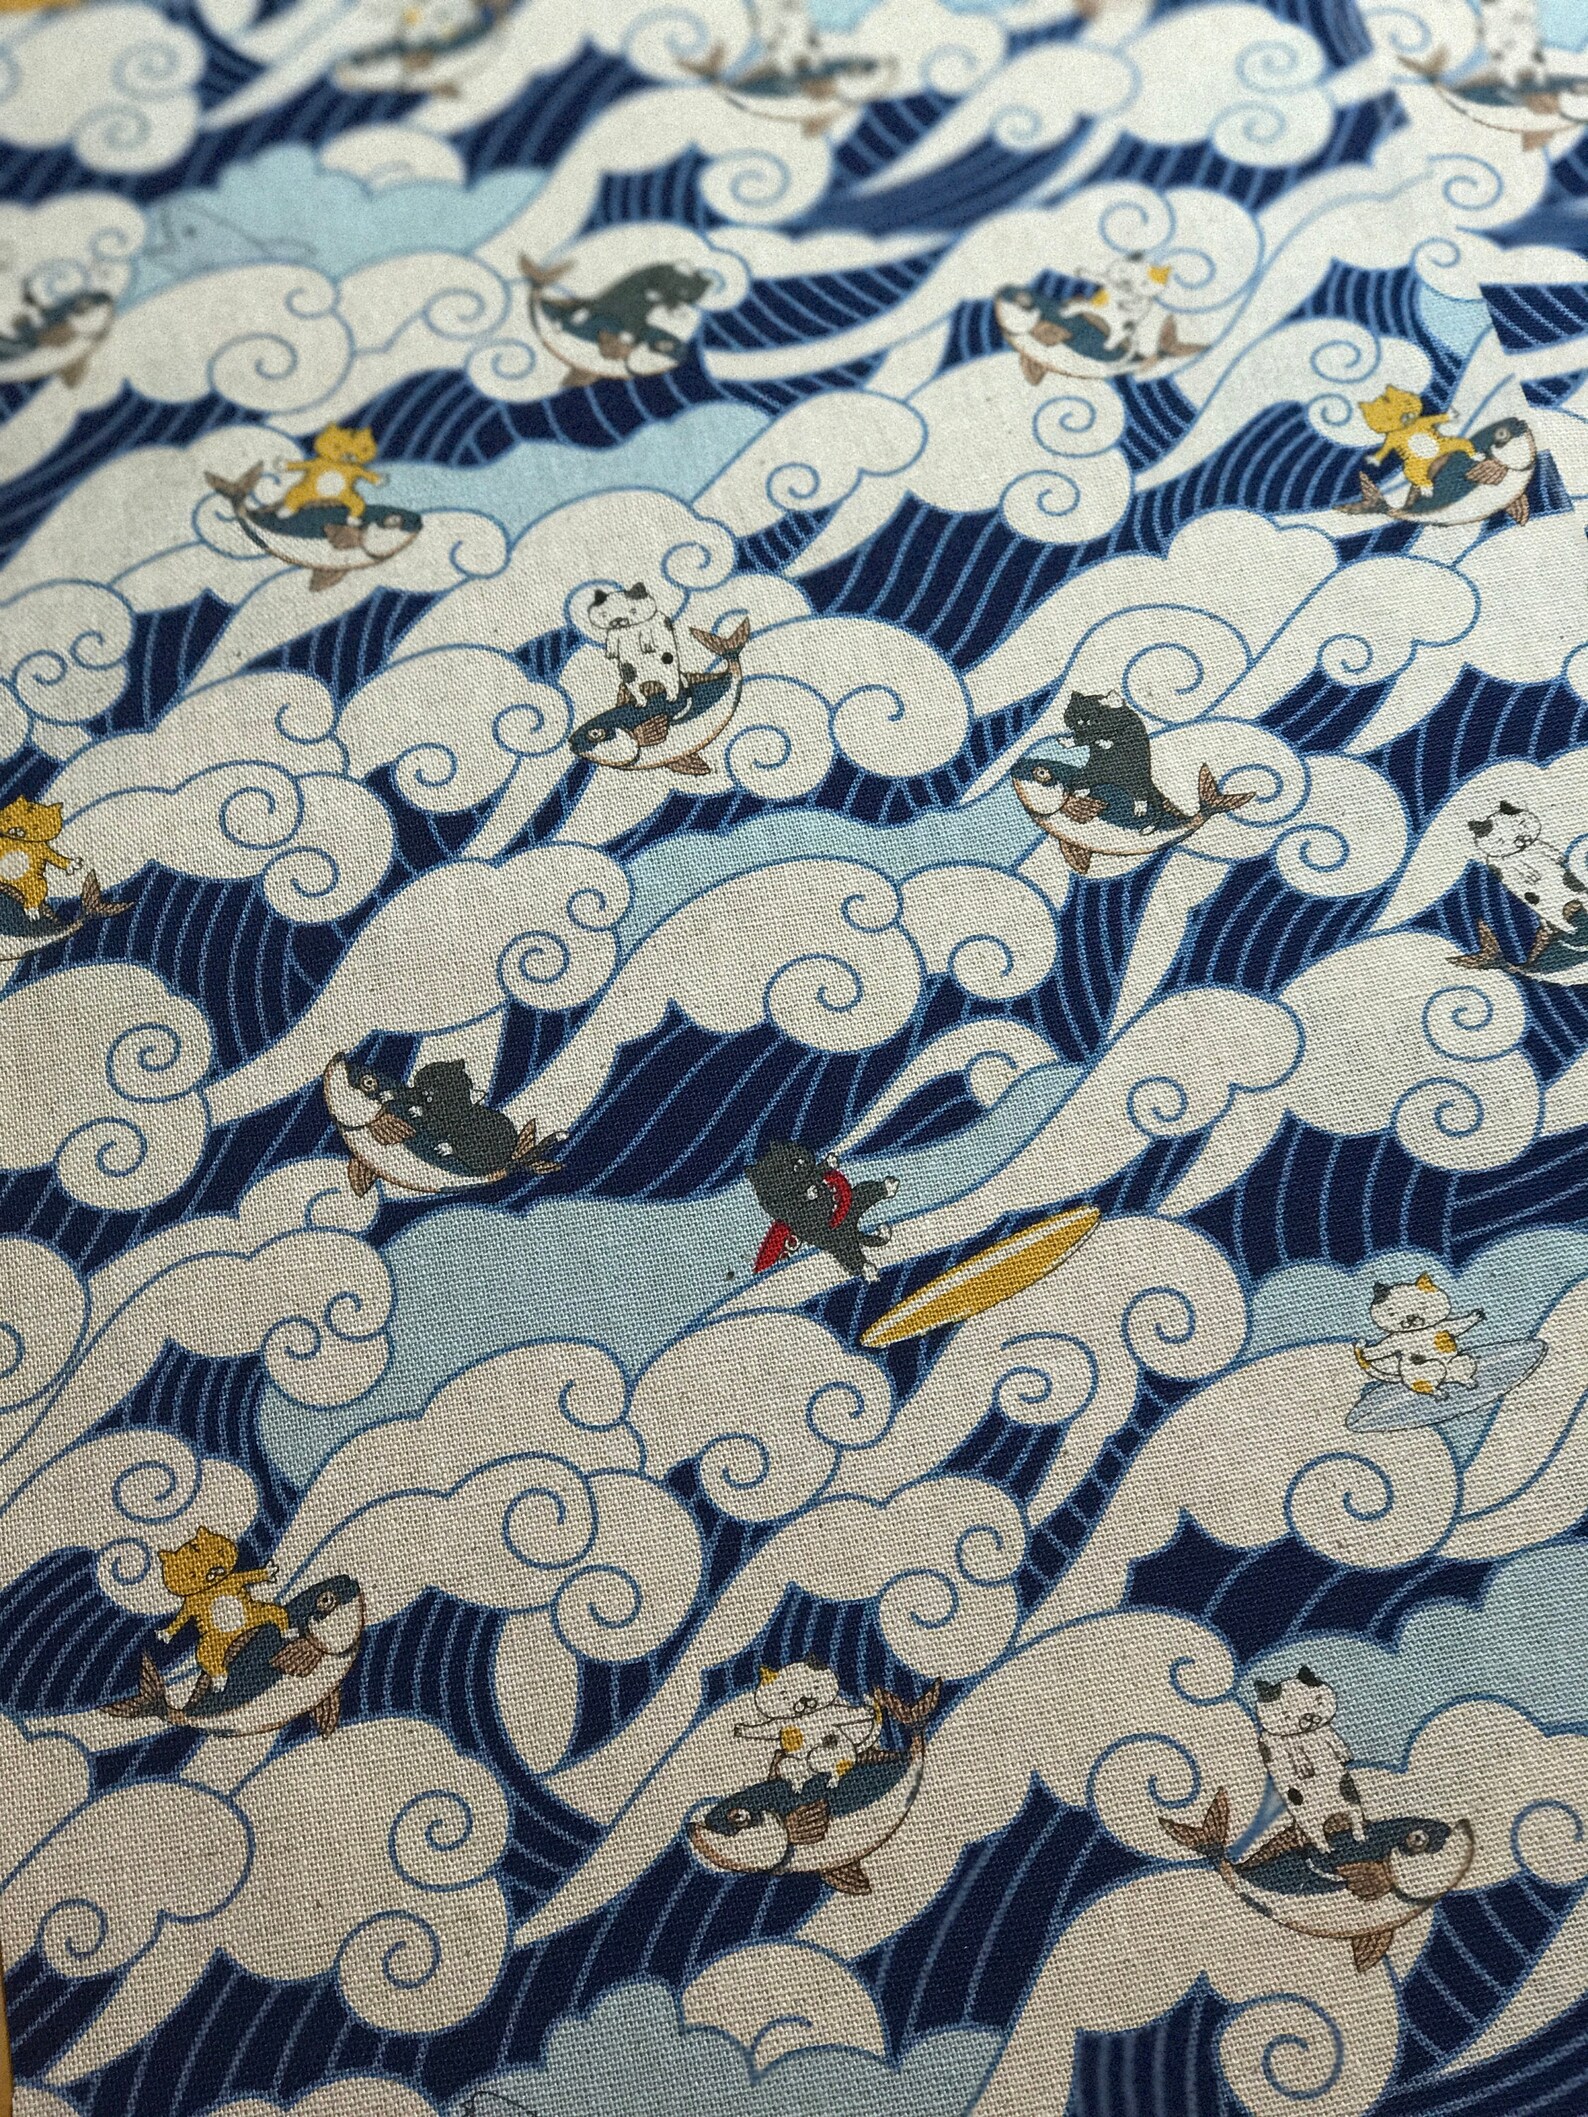 Surfing Cats Waves Canvas Cotton Fabric Made in Japan - Etsy